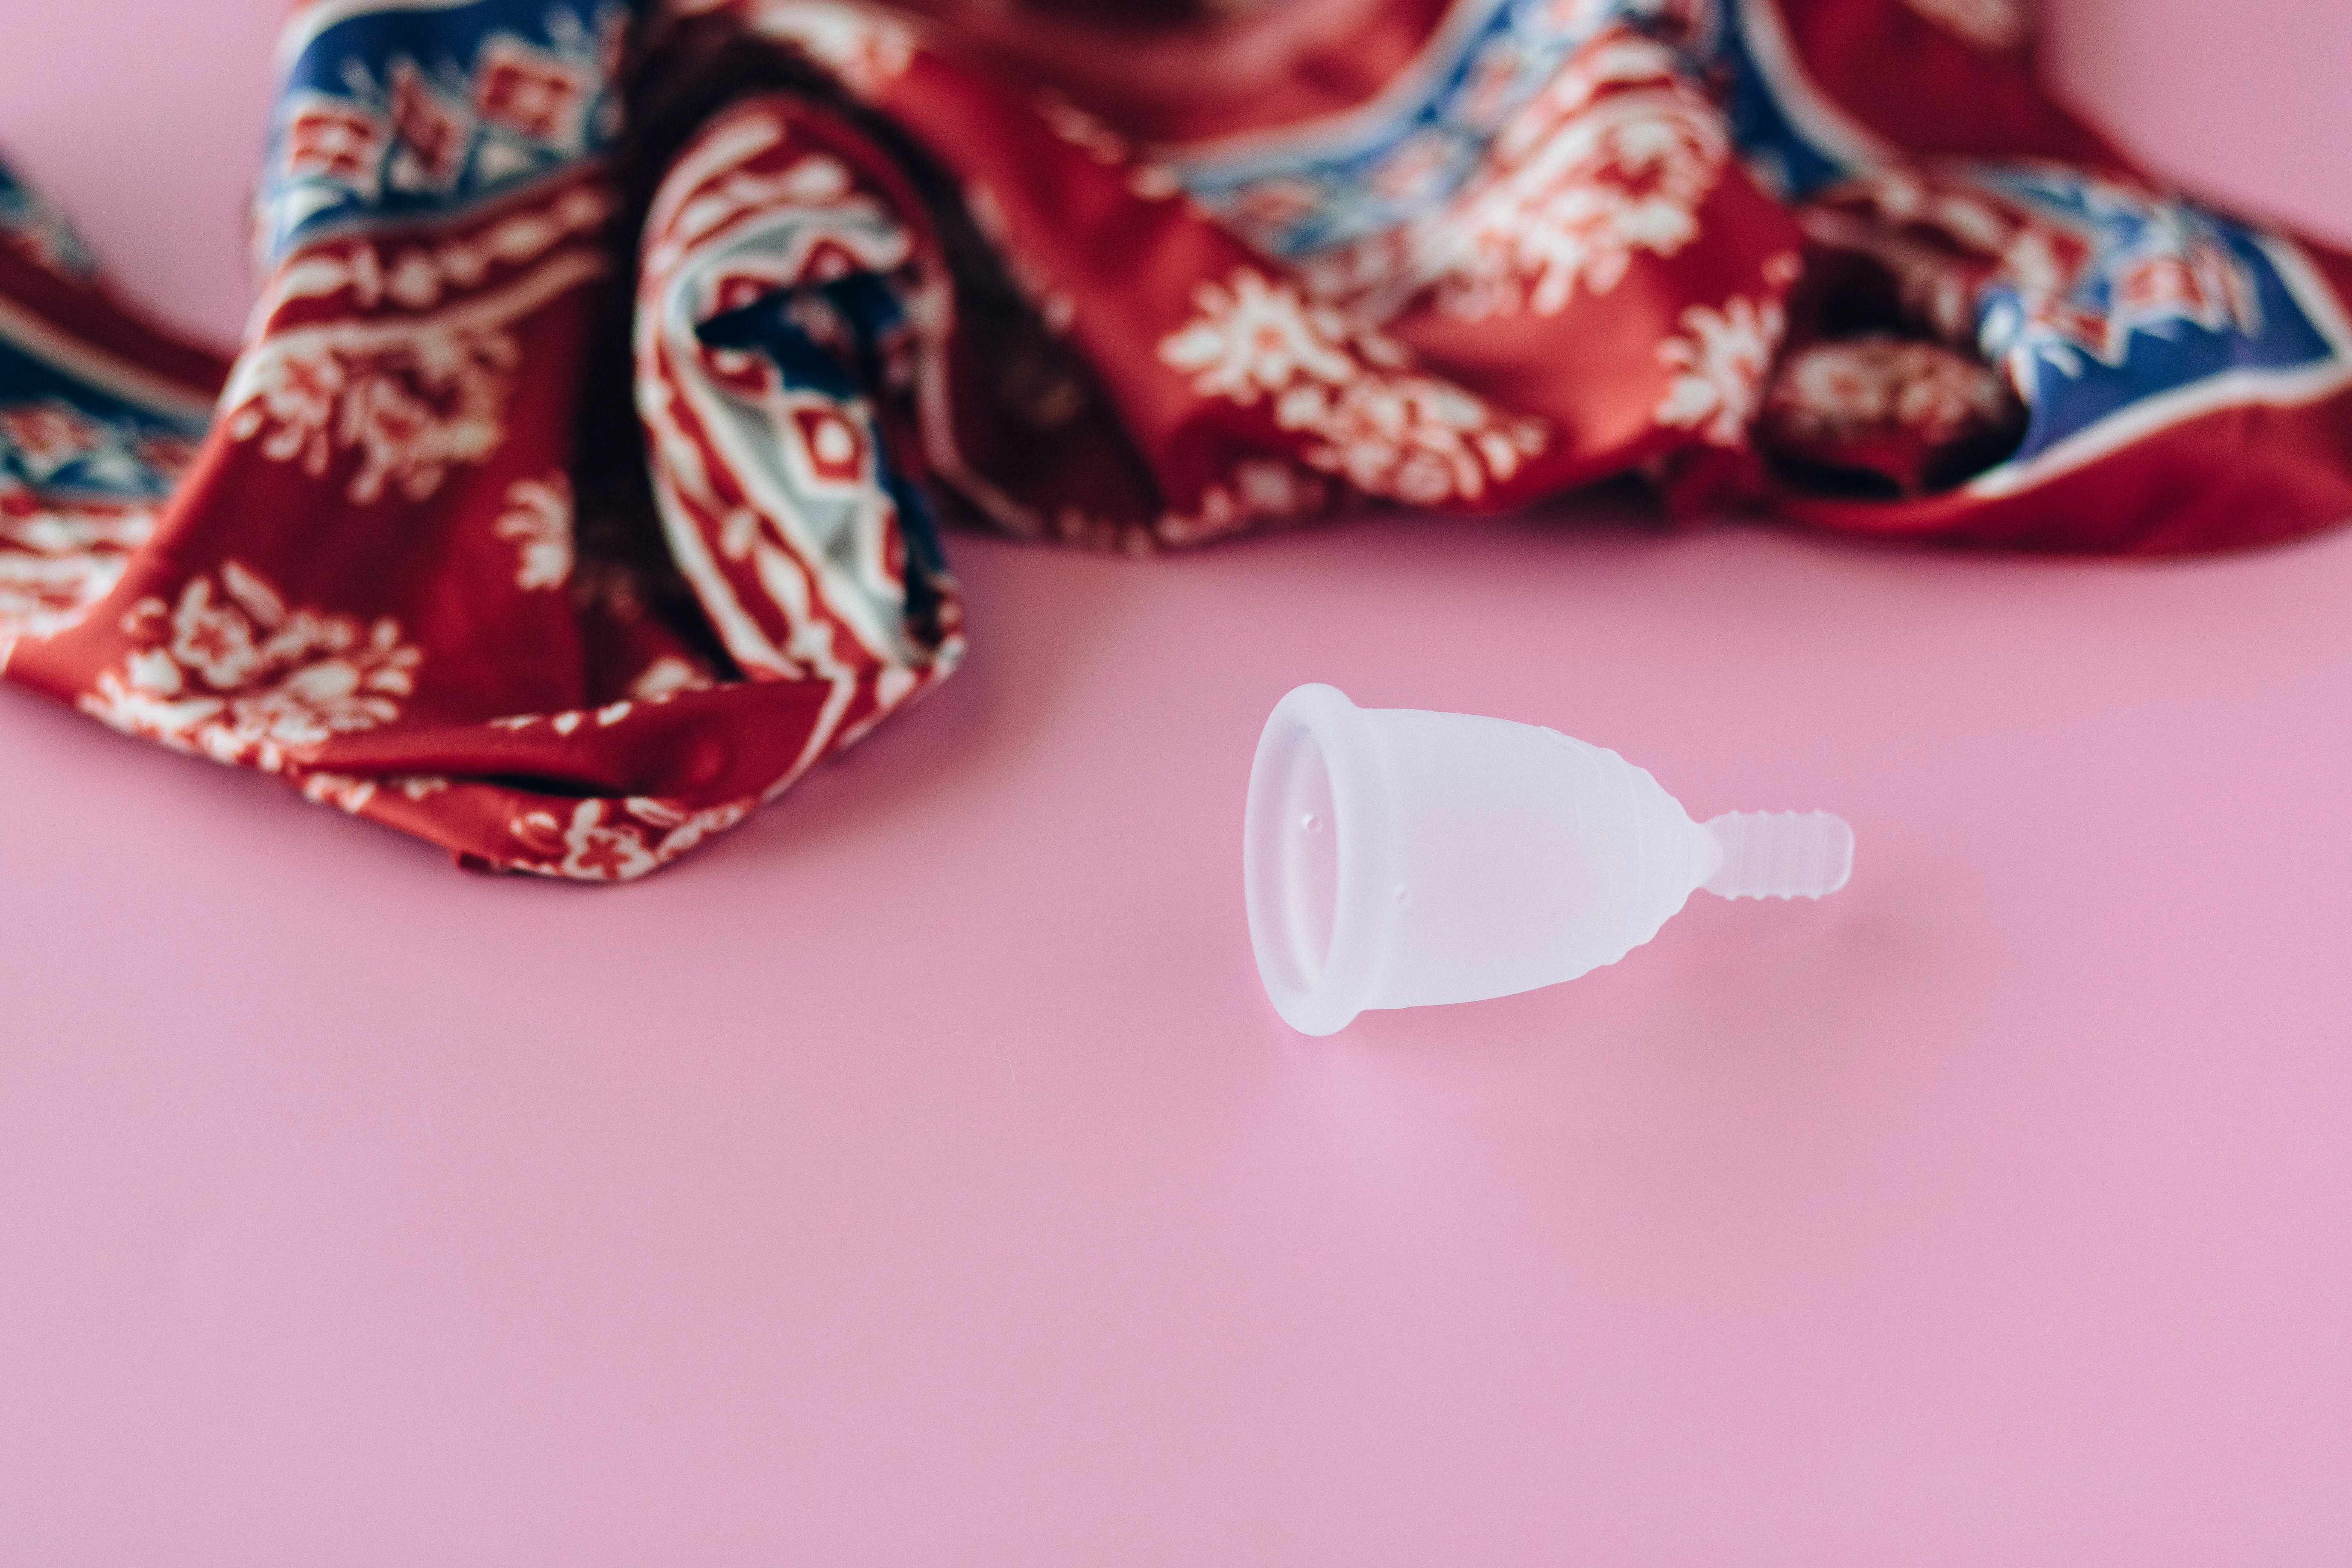 Make your period as waste-free as possible